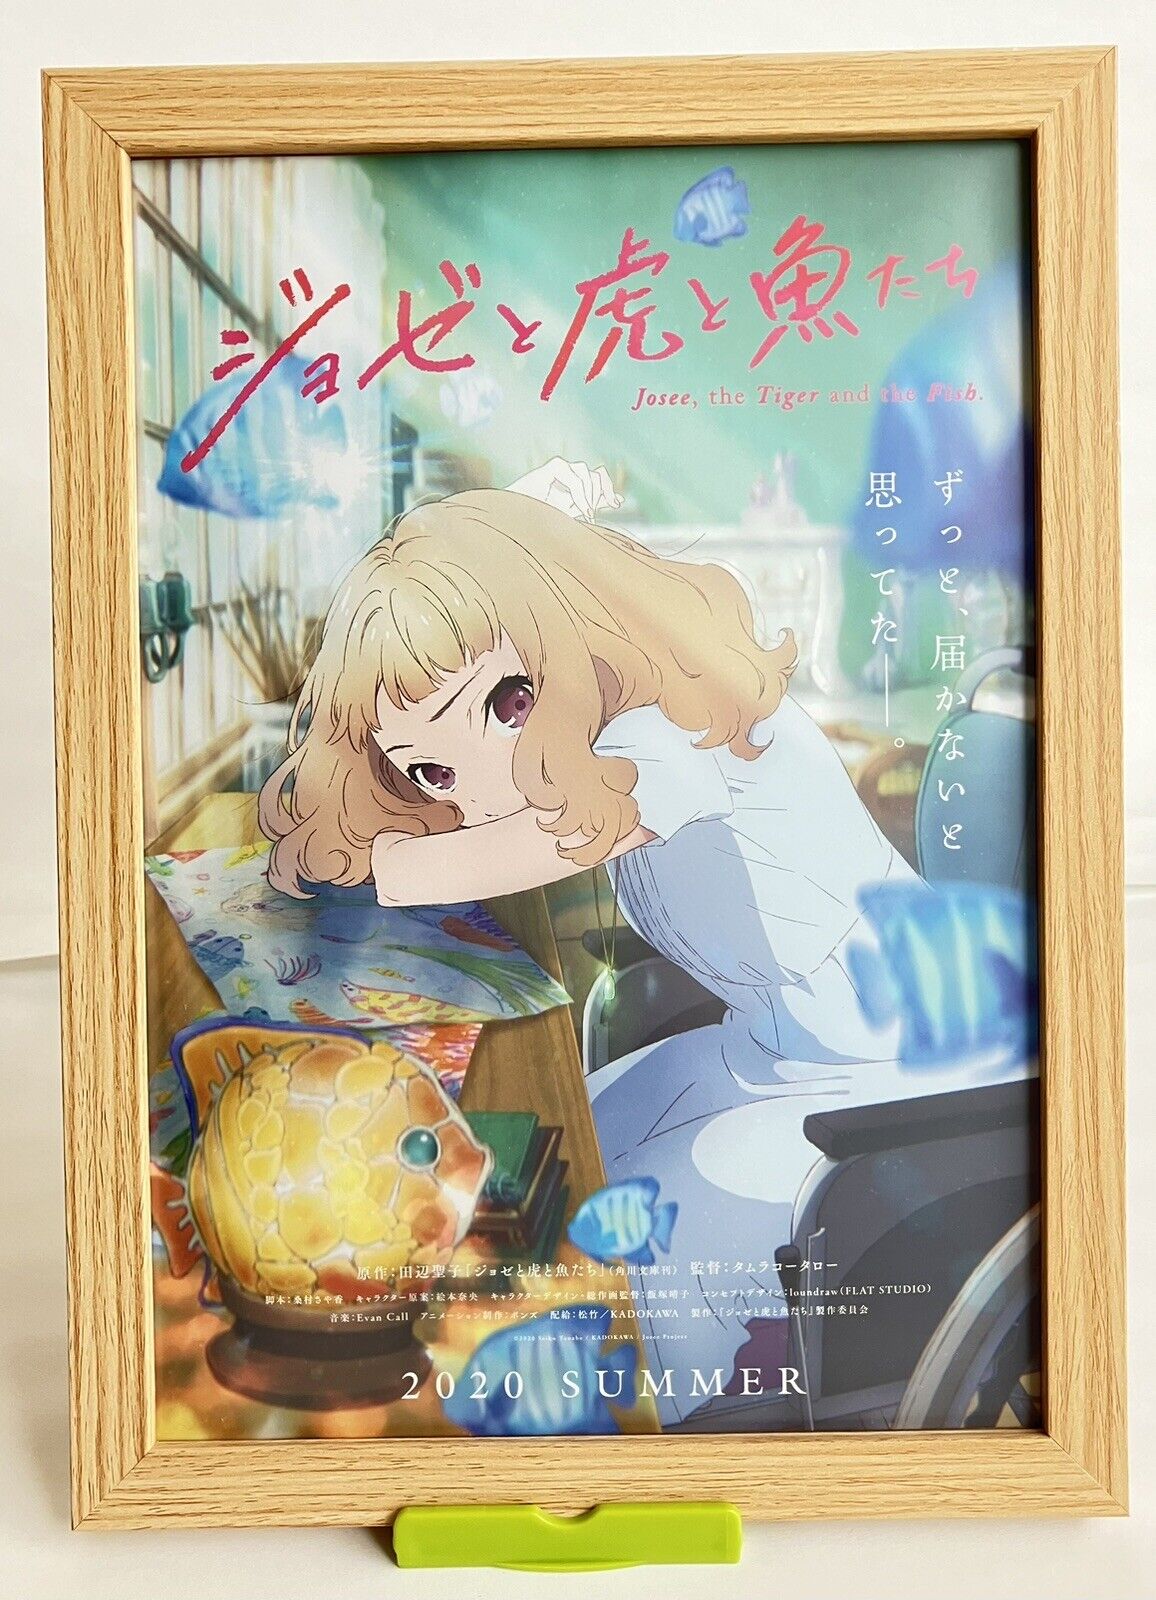 Josee, the Tiger and the Fish (2020 Japanese Anime) picture frame